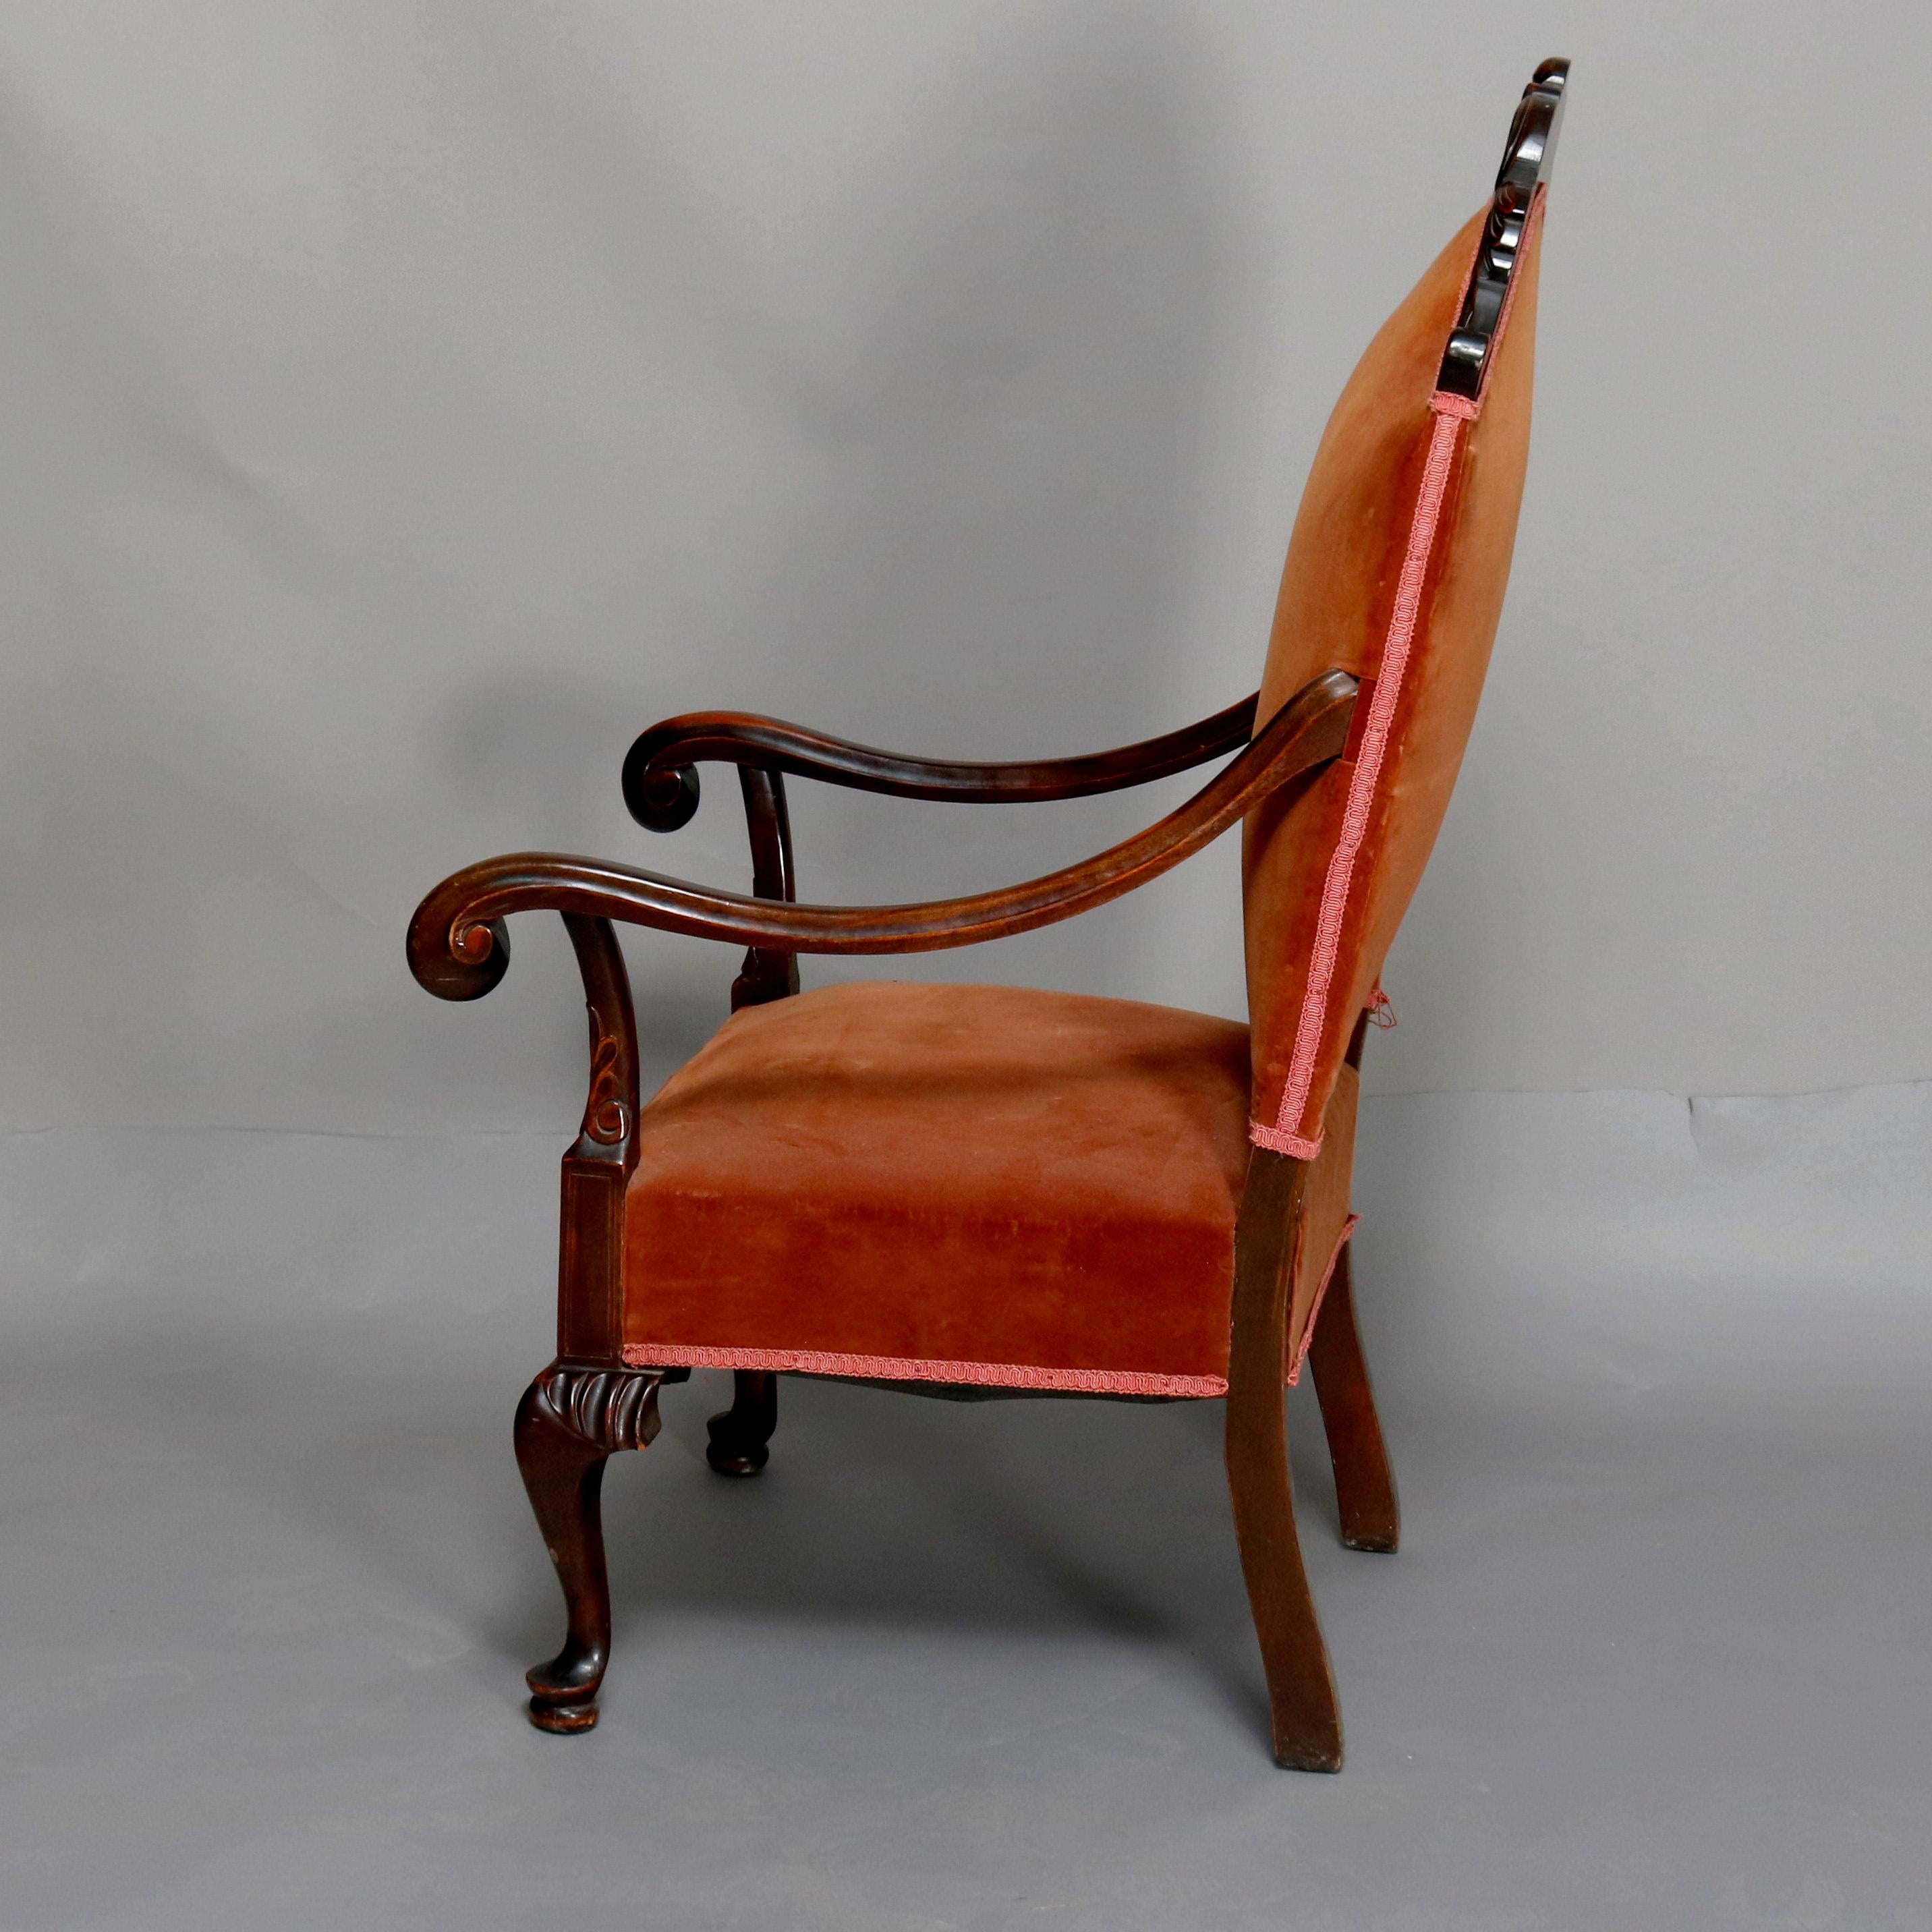 An antique French Regence style throne chair offers mahogany frame with carved acanthus crest, scroll form arms, and cabriole legs with pad feet, 19th century

Measures: 50.5